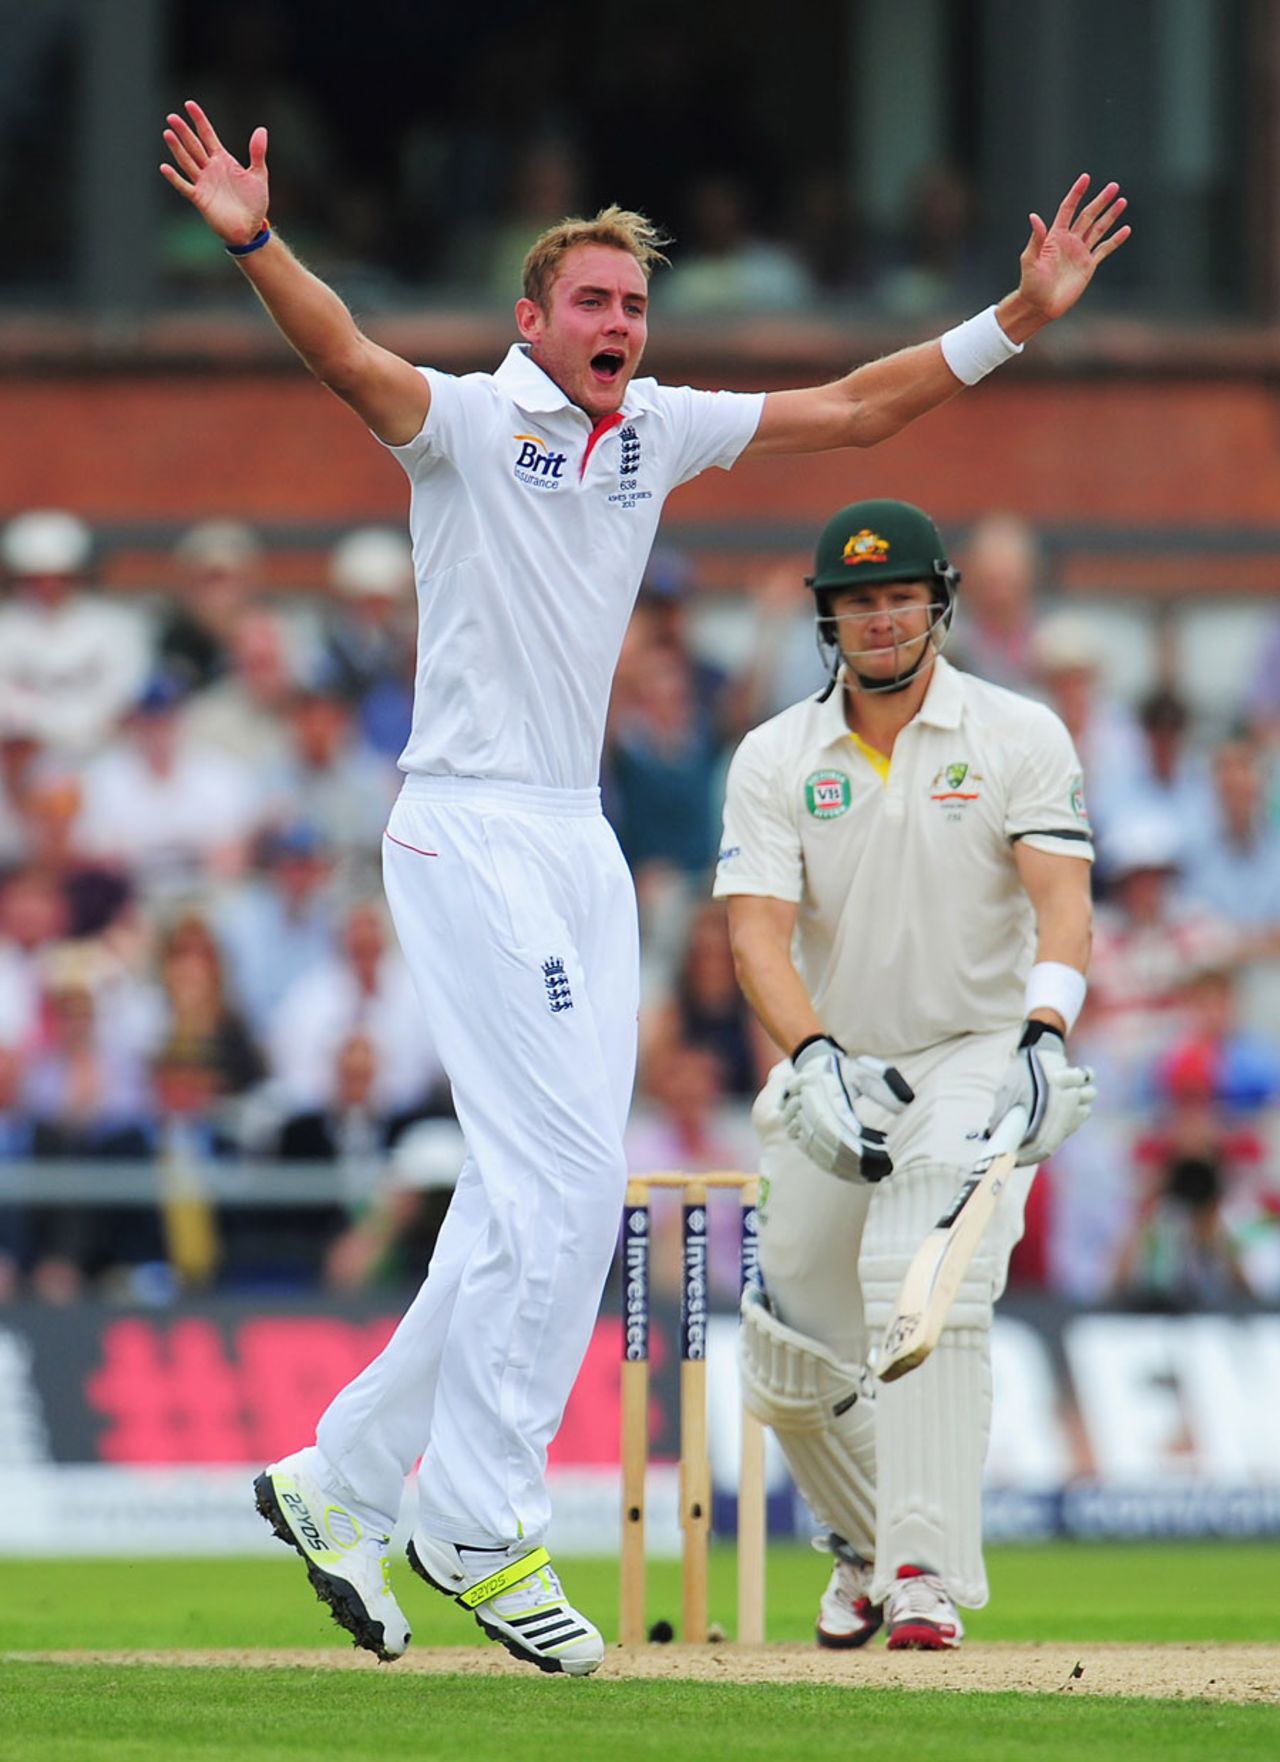 Stuart Broad has an lbw shout against Shane Watson, England v Australia, 3rd Investec Test, Old Trafford, 1st day, August 1, 2013